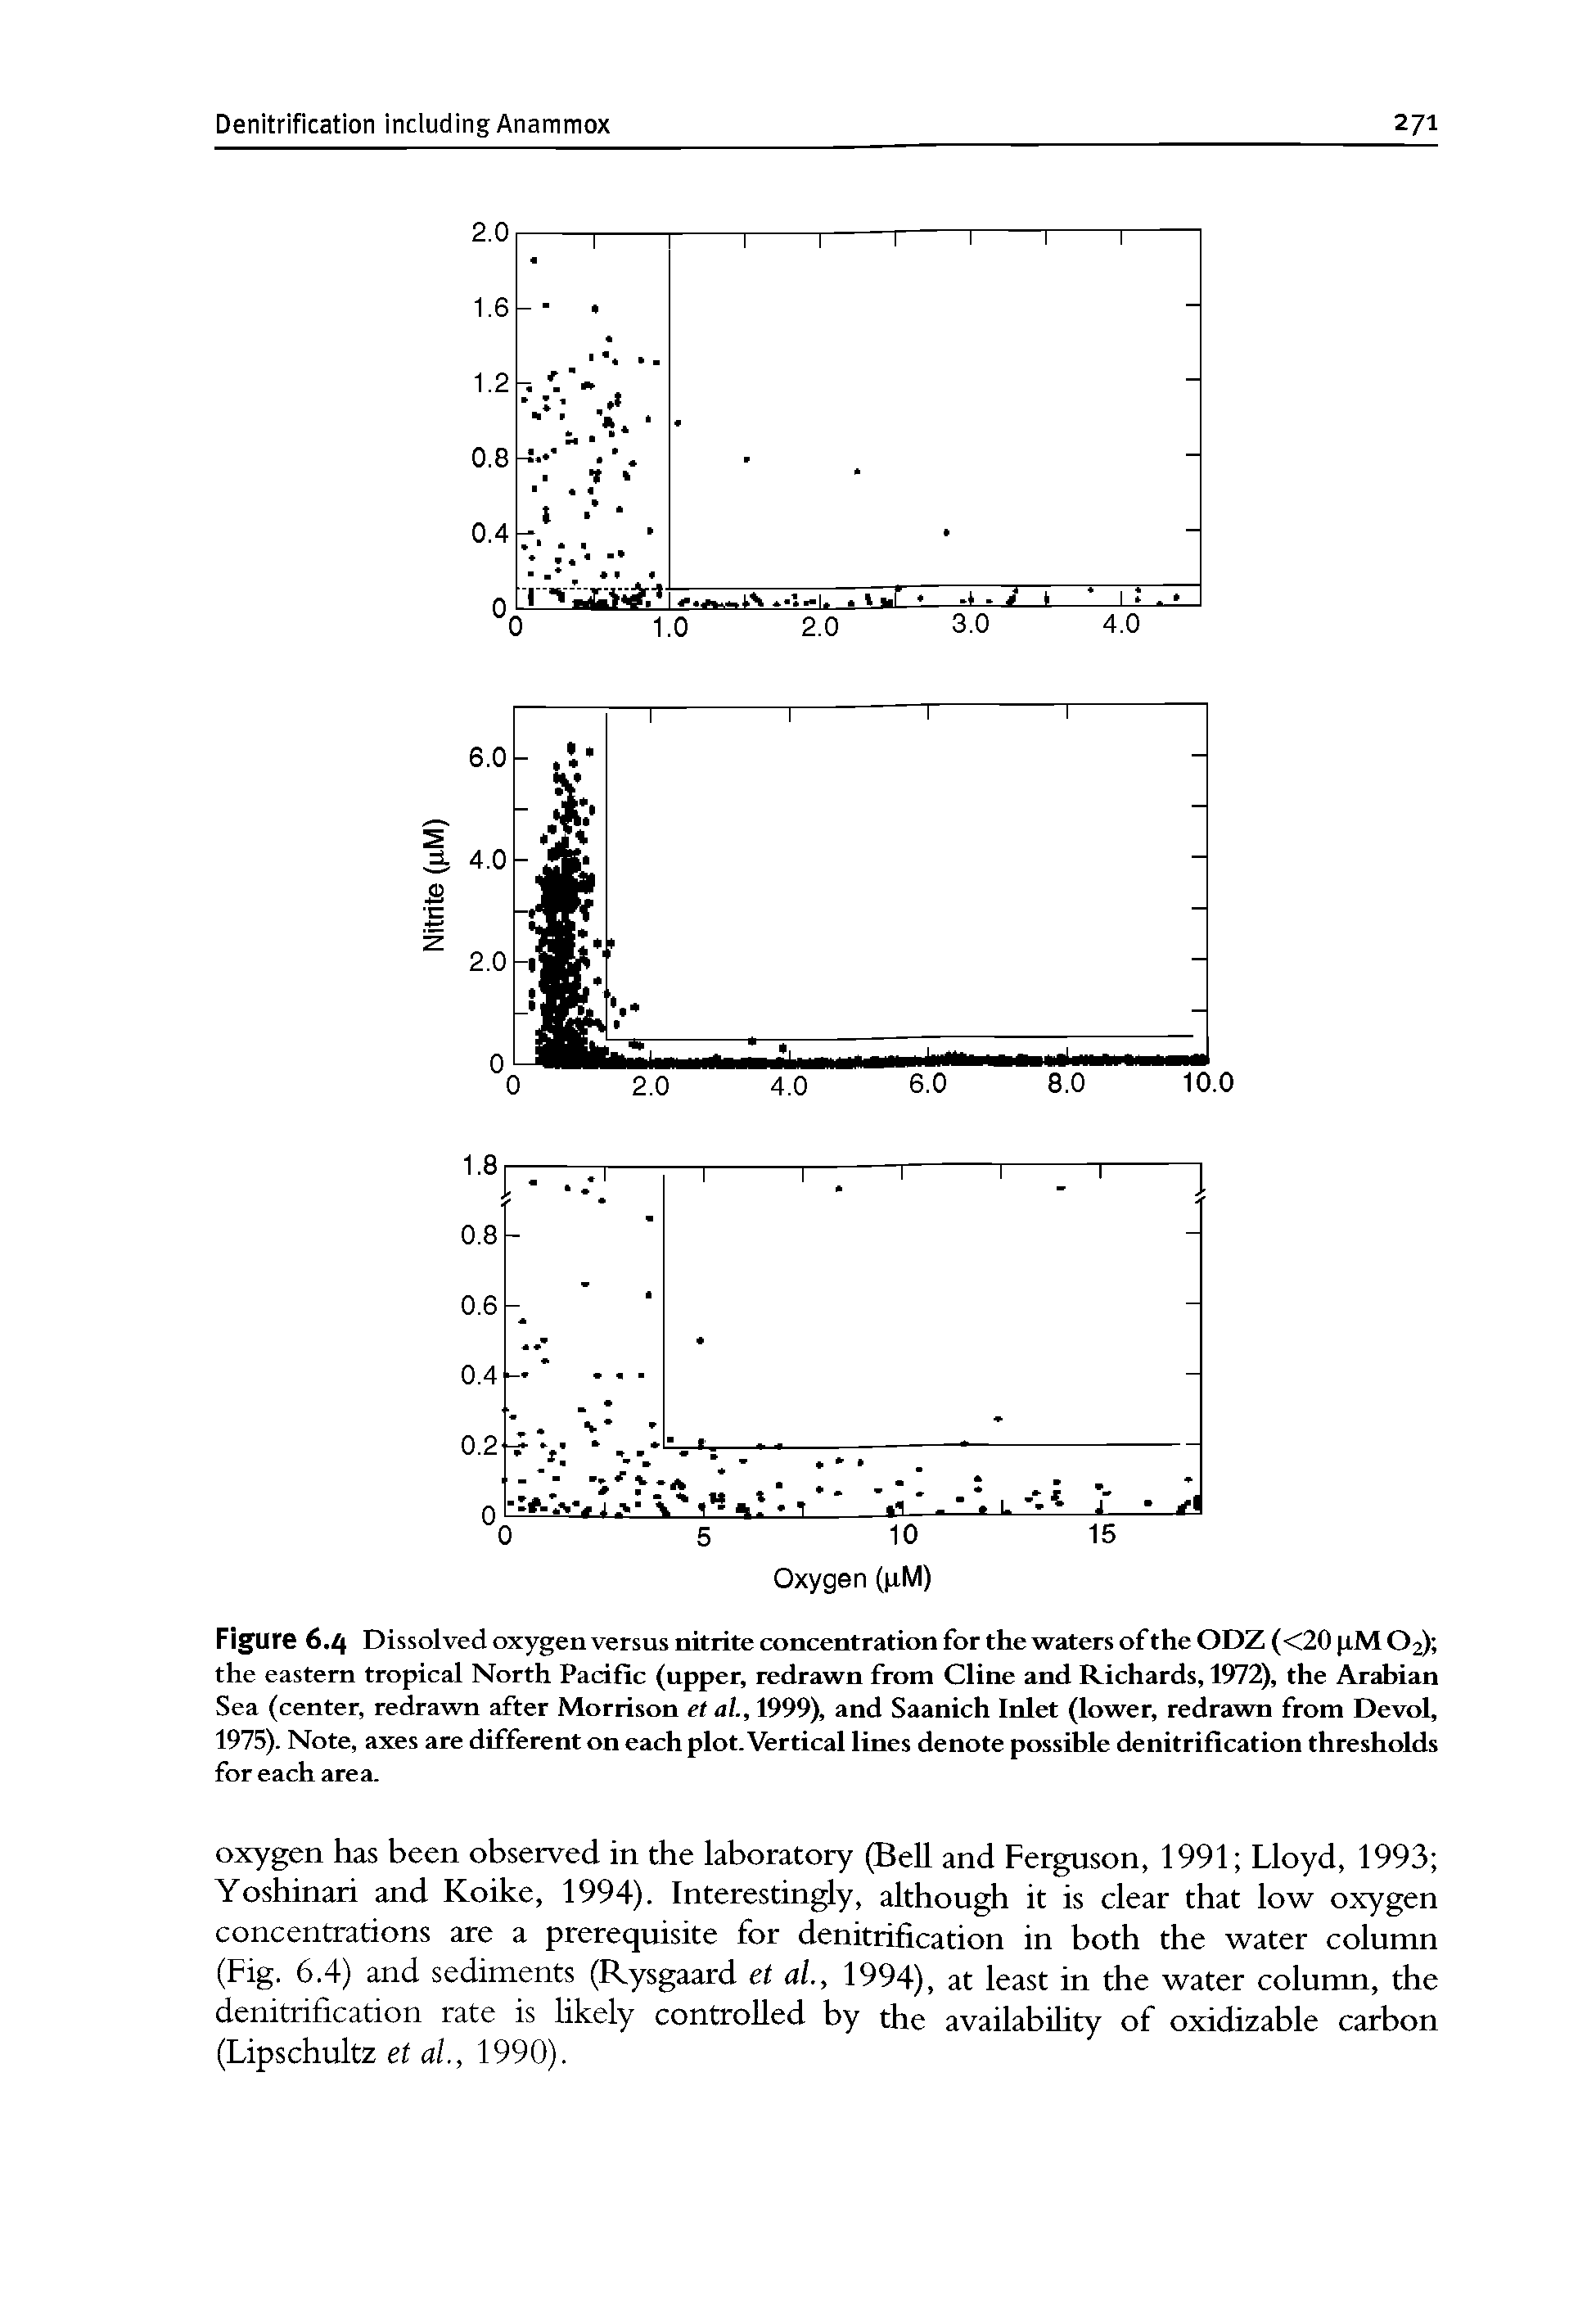 Figure 6.Z( Dissolved oxygen versus nitrite concentration for the waters of the ODZ (<20 tM O2) the eastern tropical North Pacific (upper, redrawn from Cline and Richards, 1972), the Arabian Sea (center, redrawn after Morrison et ai, 1999), and Saanich Inlet (lower, redrawn from Devol, 1975). Note, axes are different on each plot. Vertical lines denote possible denitrification thresholds for each area.